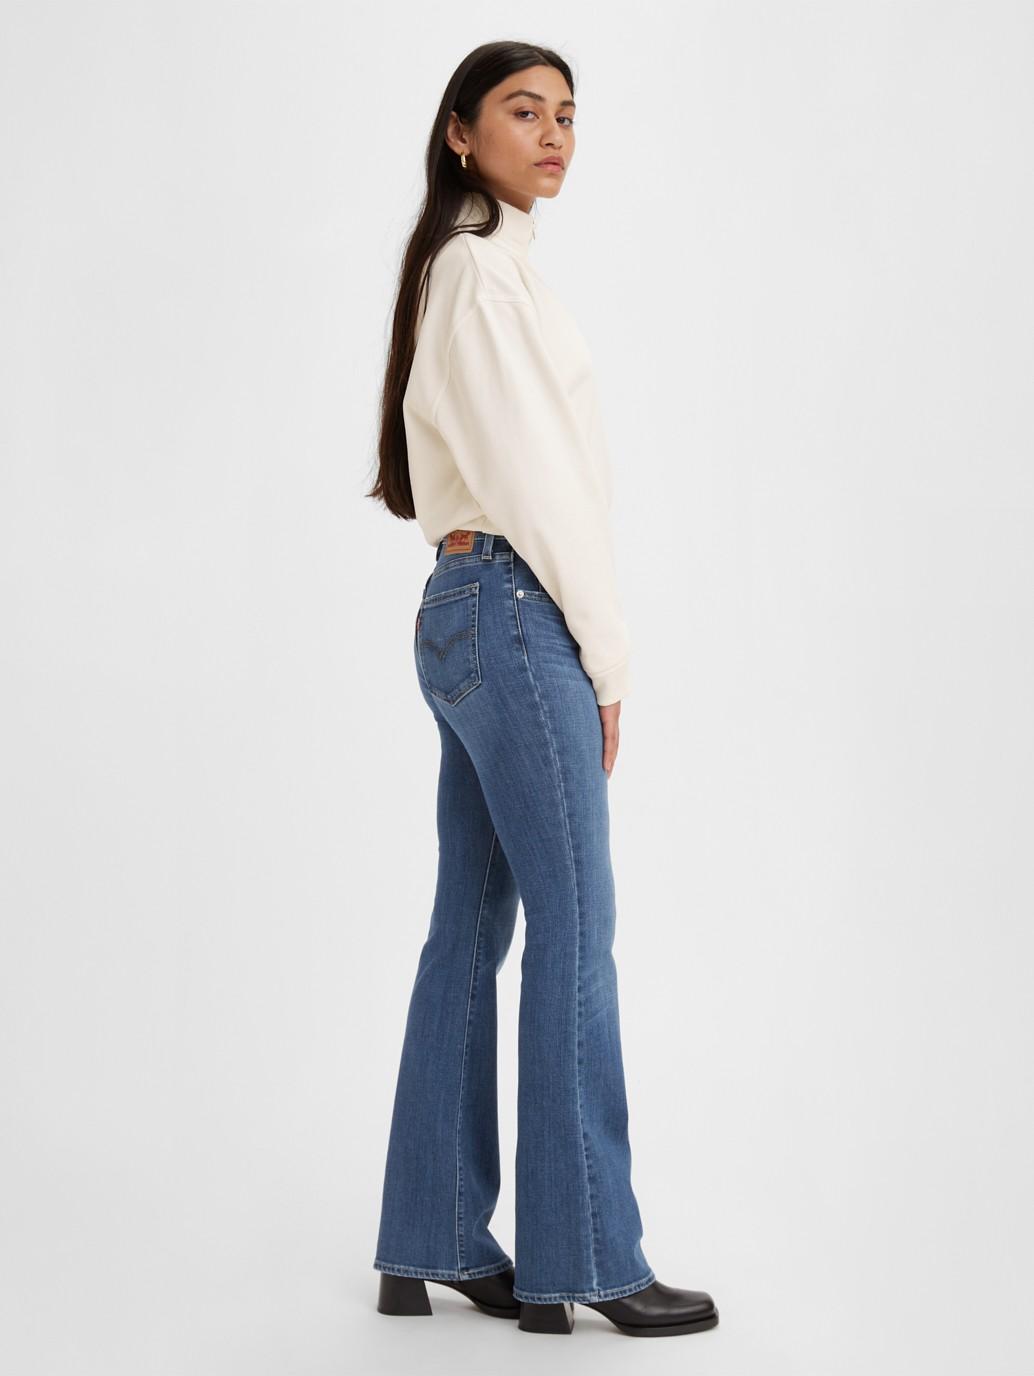 Buy Levi's® Women's 726 High-Rise Flare Jeans | Levi’s® Official Online ...